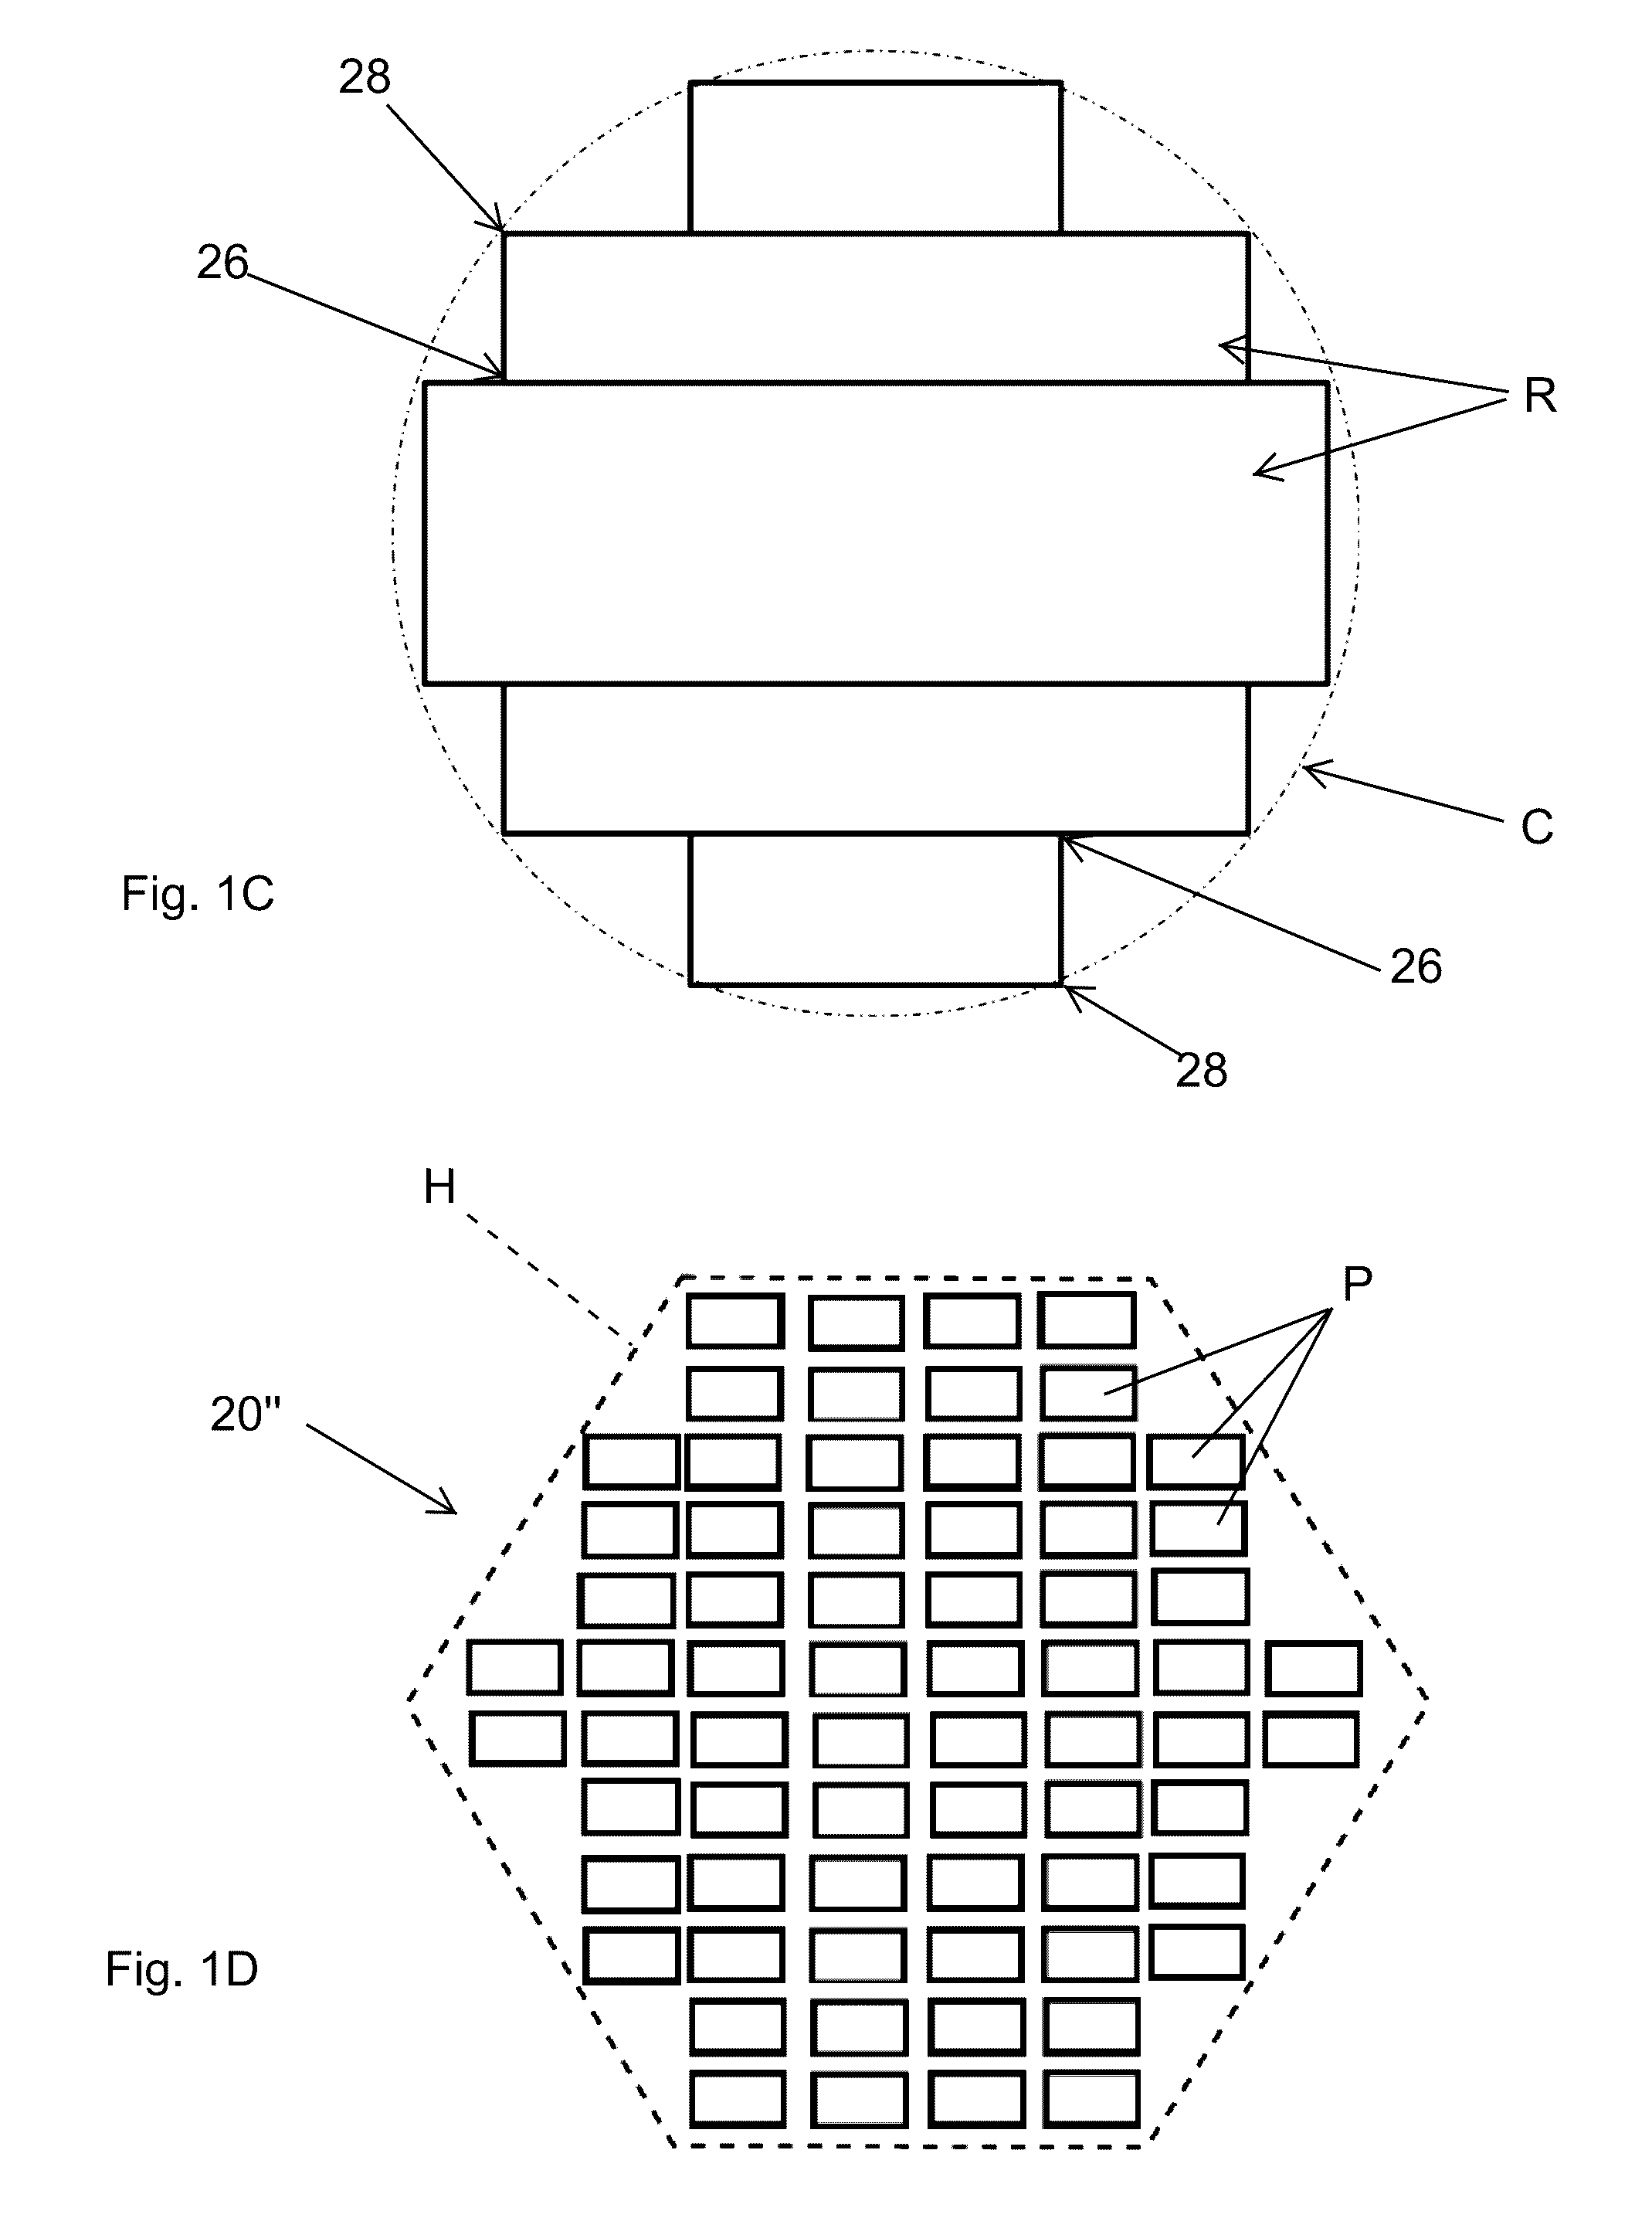 Floating solar panel array with one-axis tracking system